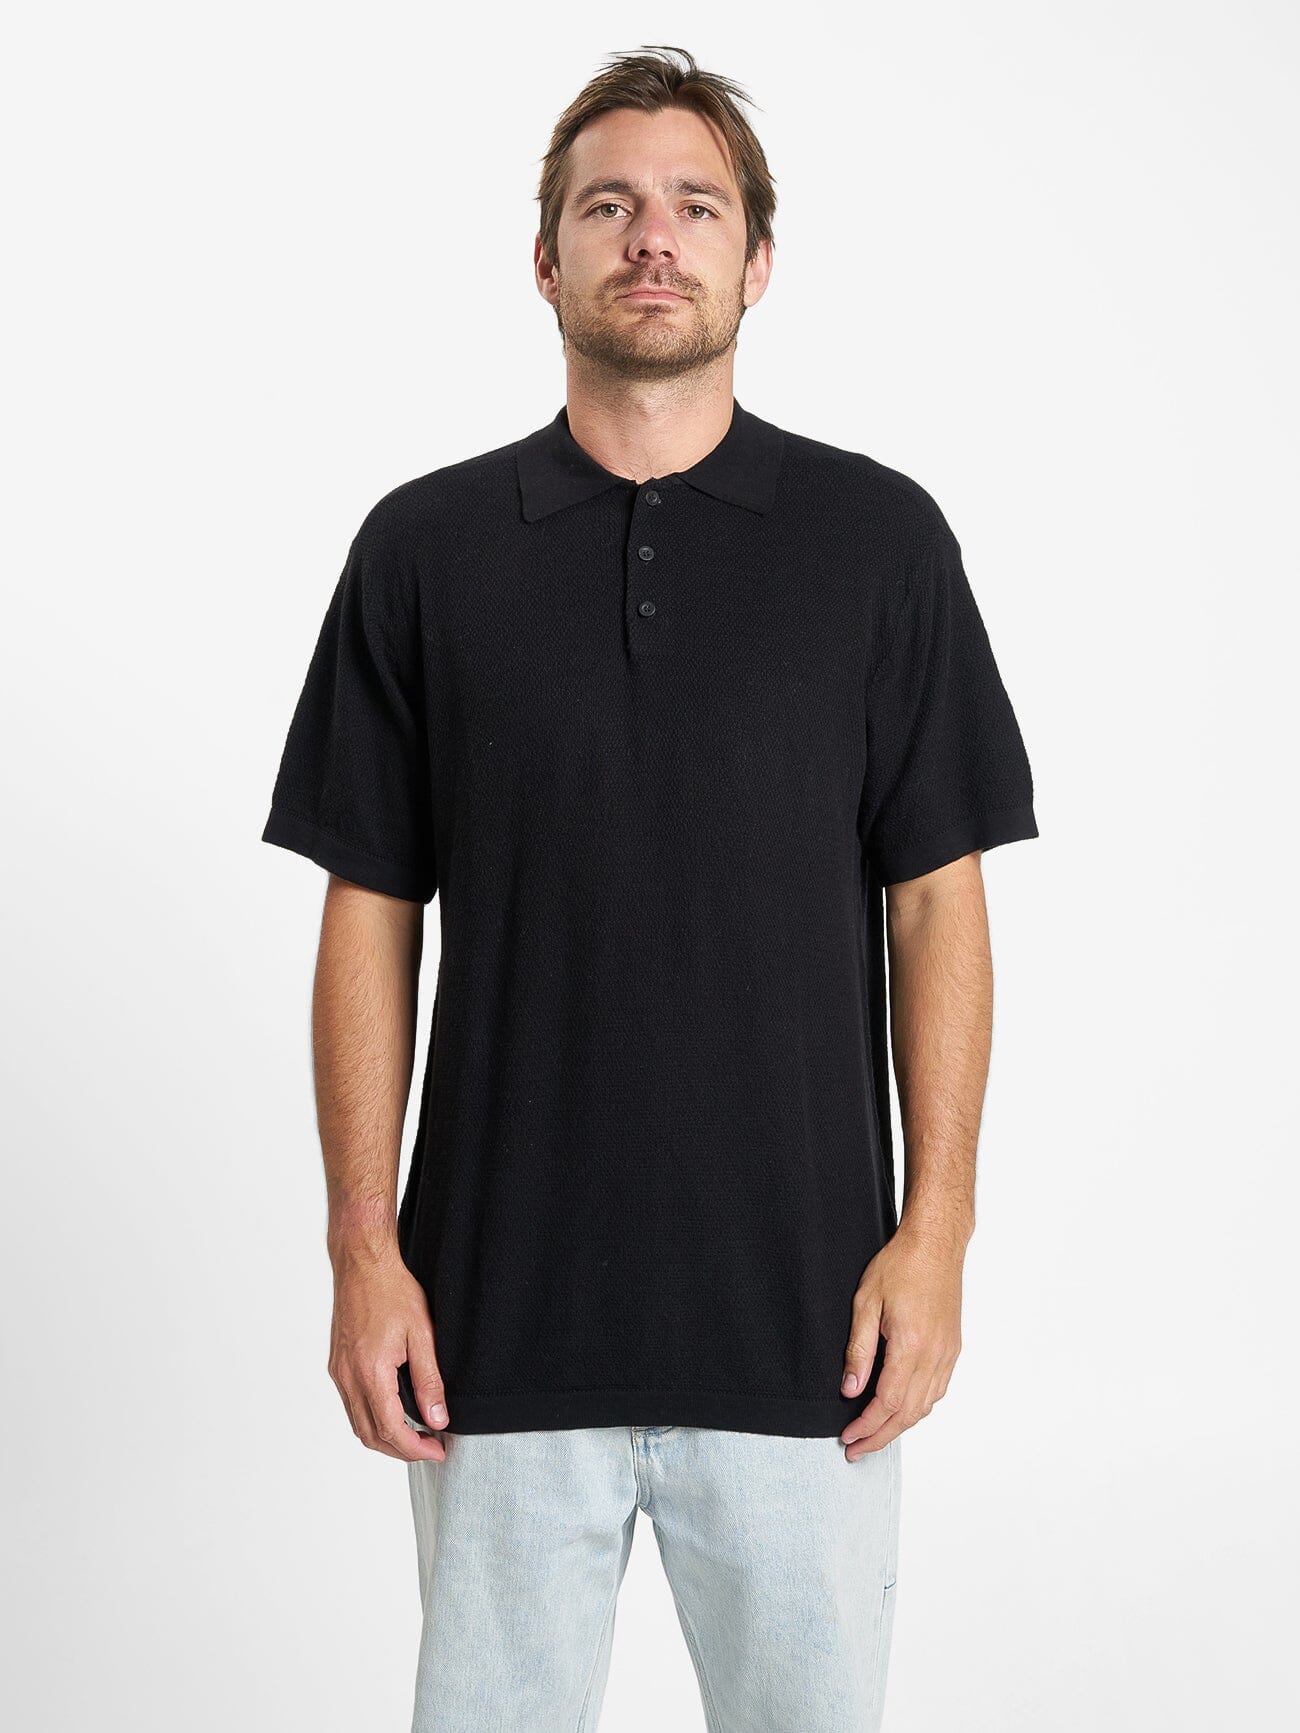 Issued Polo - Black